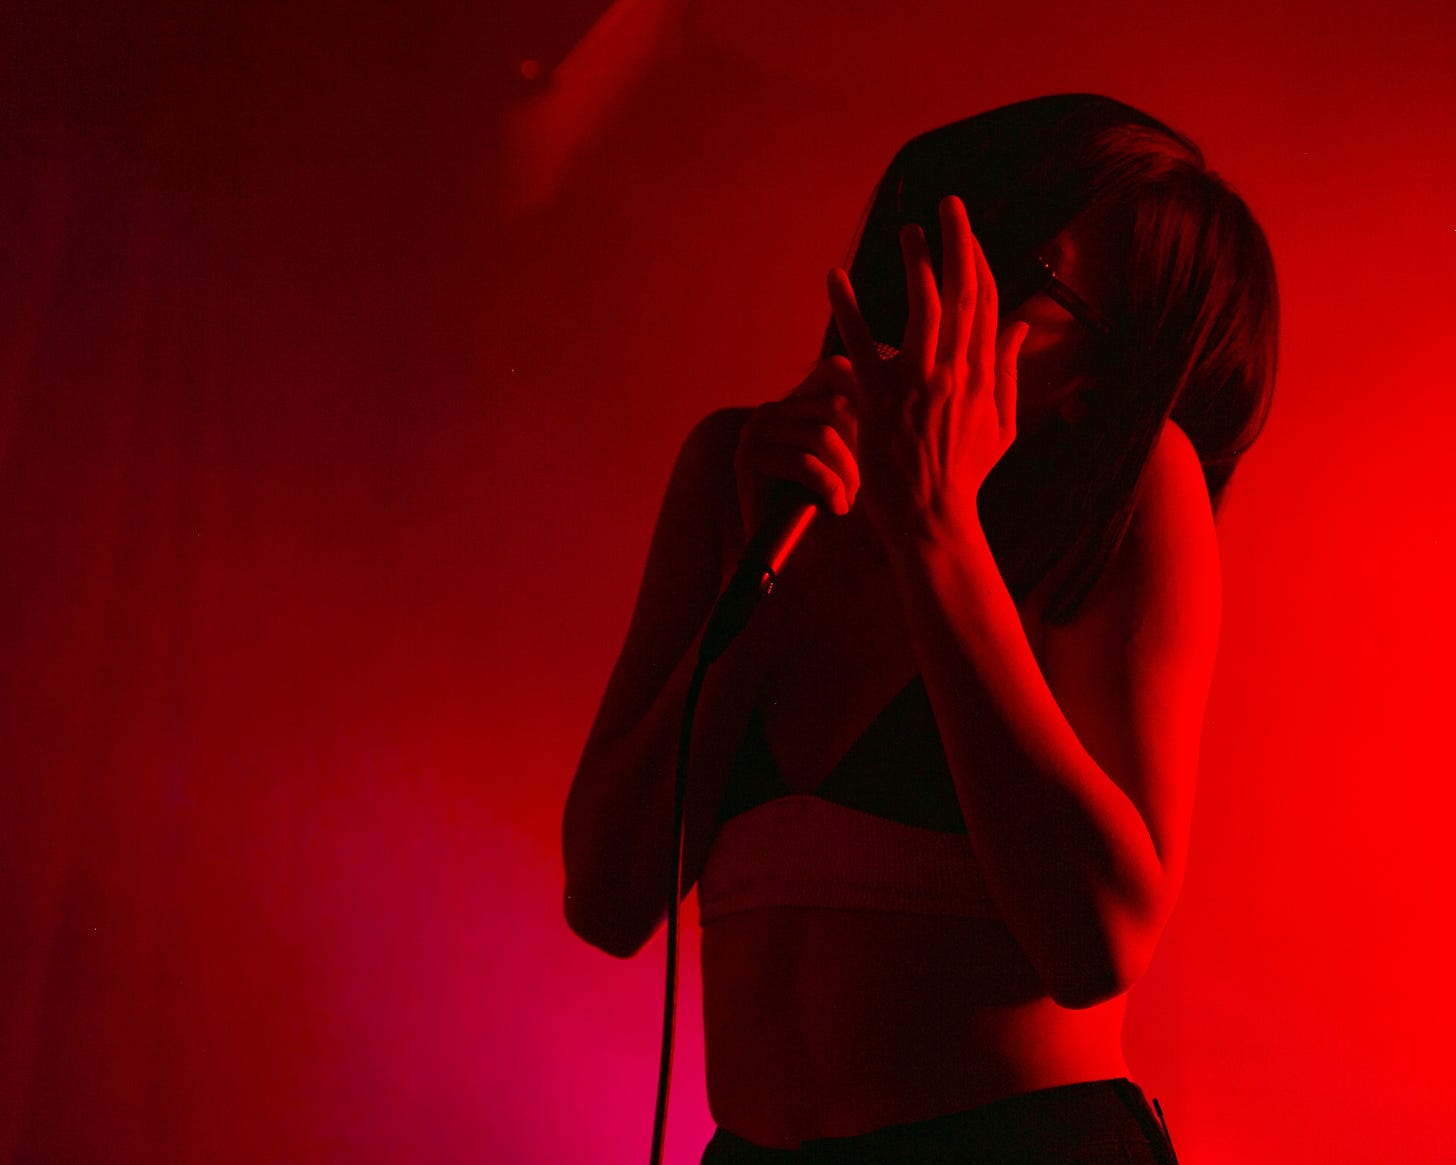 a slim framed human with soft curves sings into a microphone, the photo is red and black due to intensely pigmented red lights